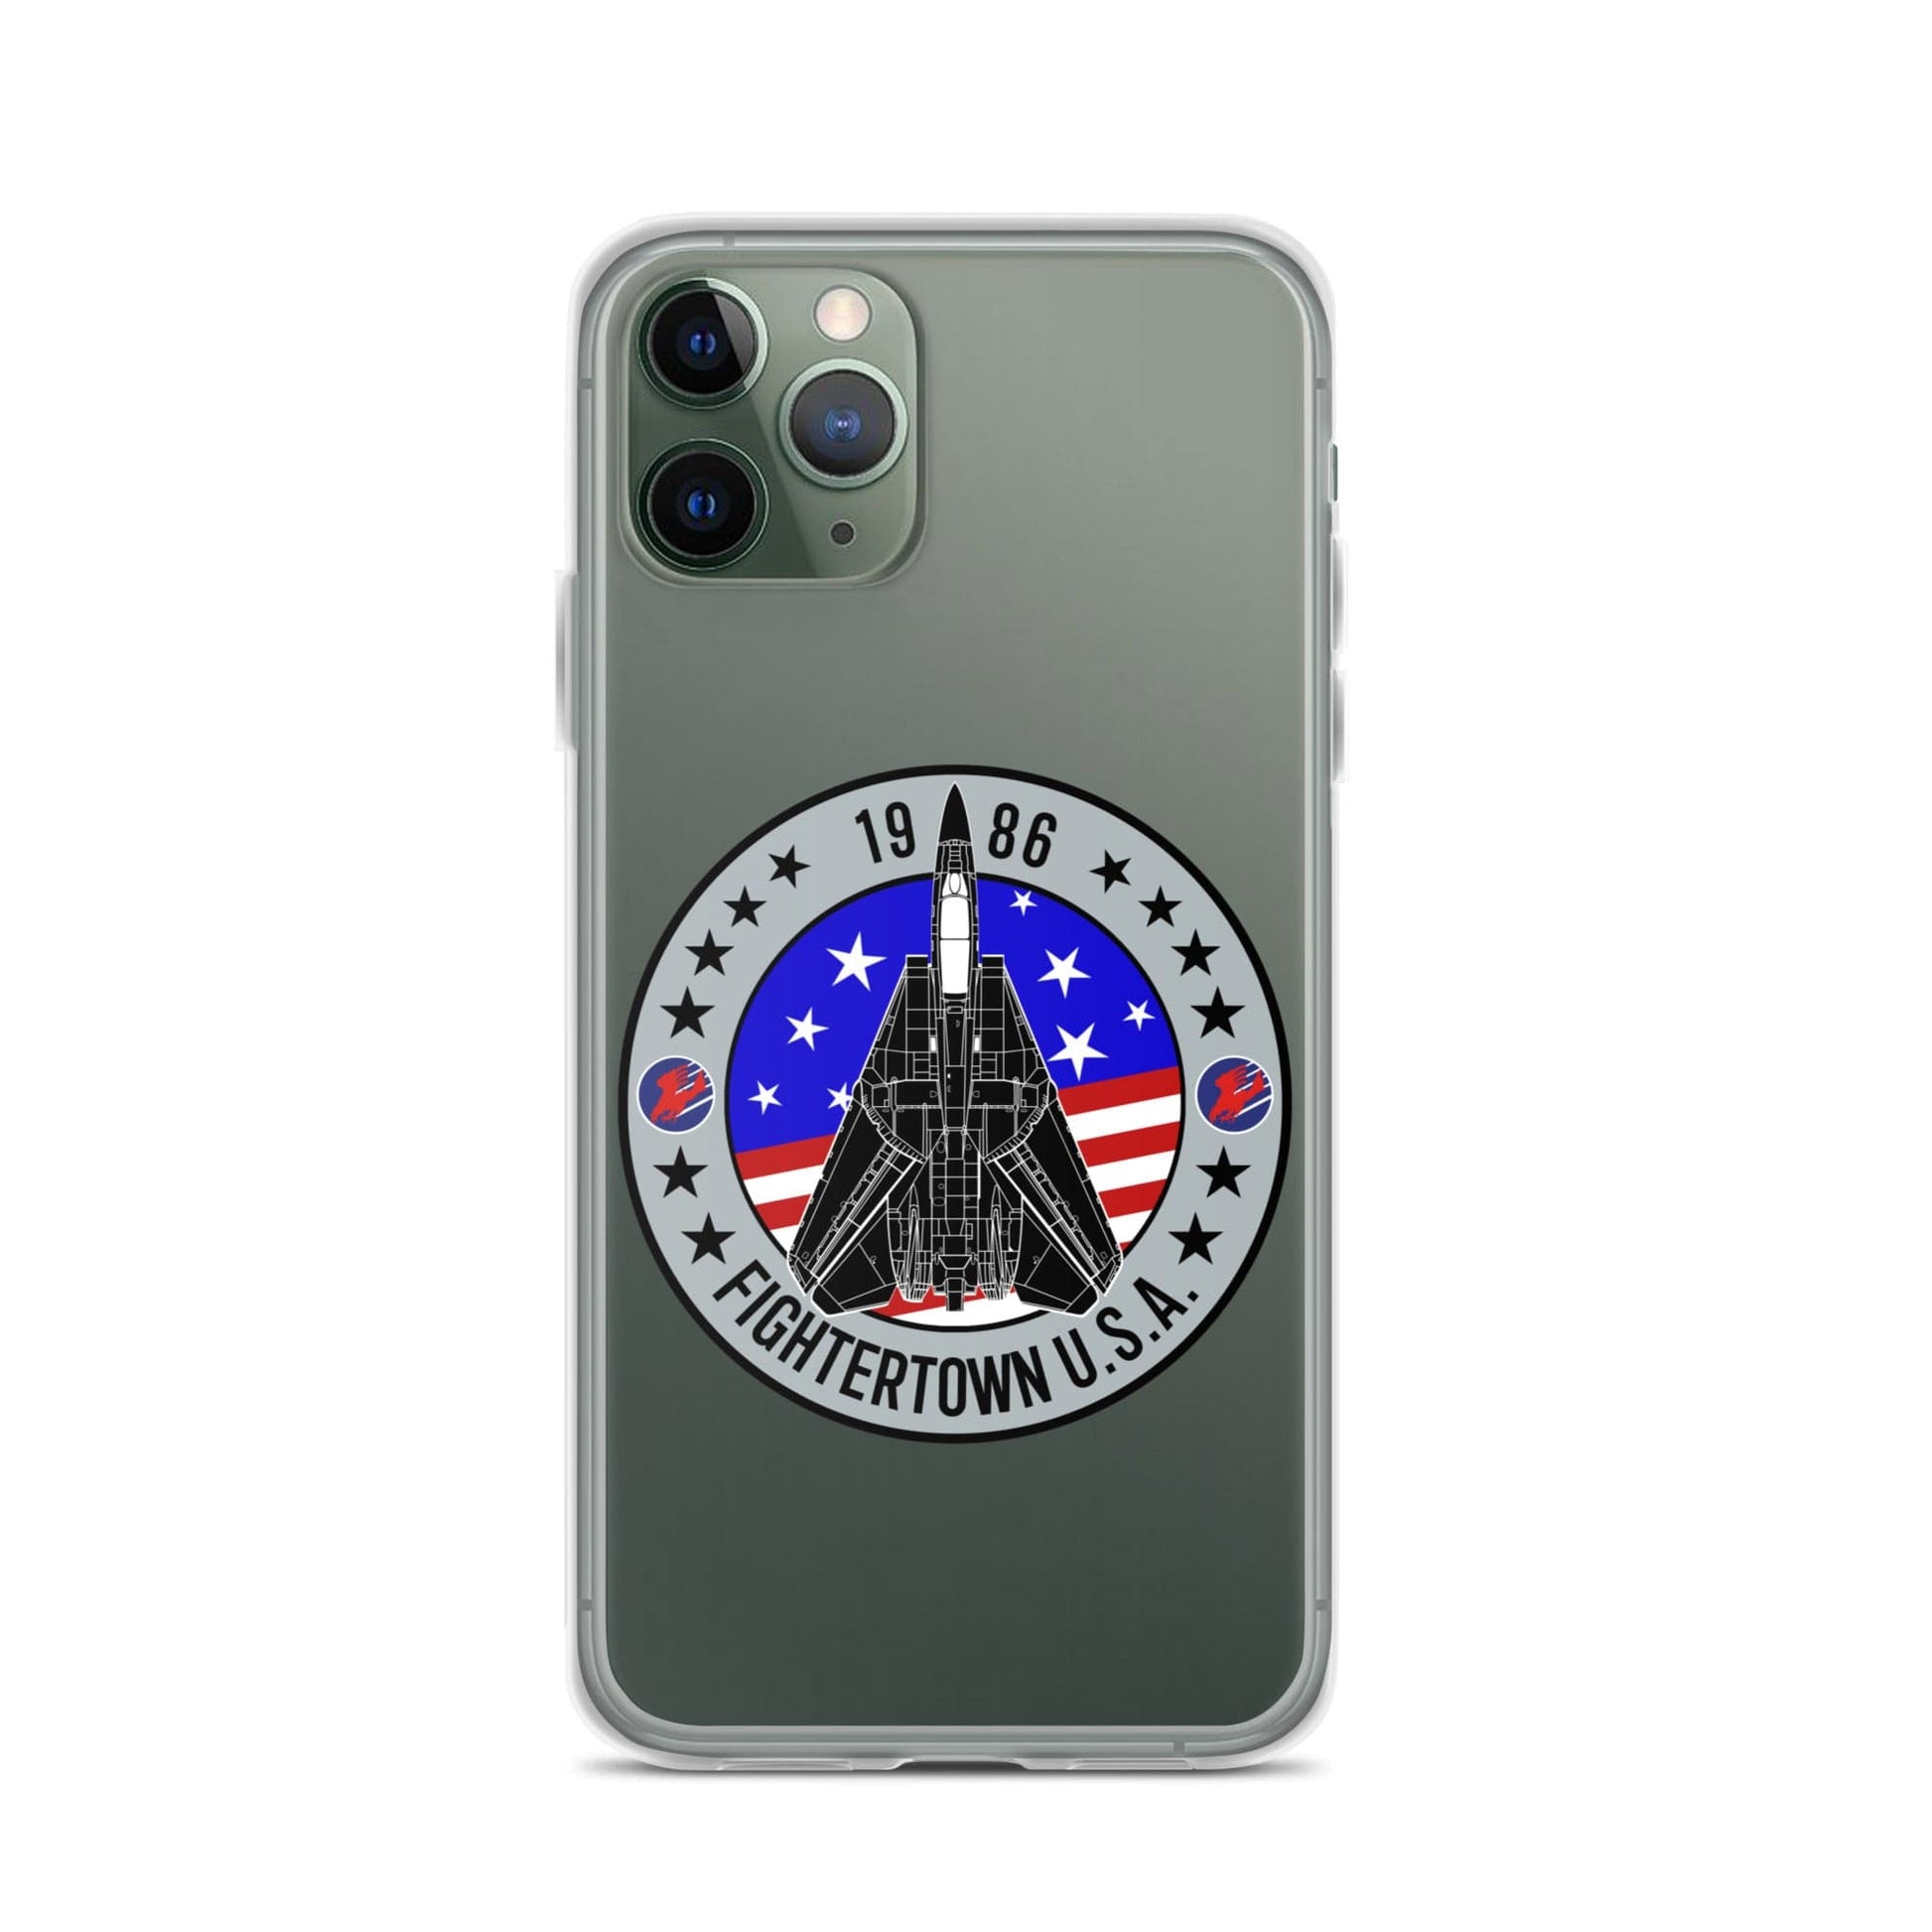 Top Gun Fans Mobile Phone Cases iPhone 11 Pro F-14 Tomcat Fightertown Clear iPhone Case